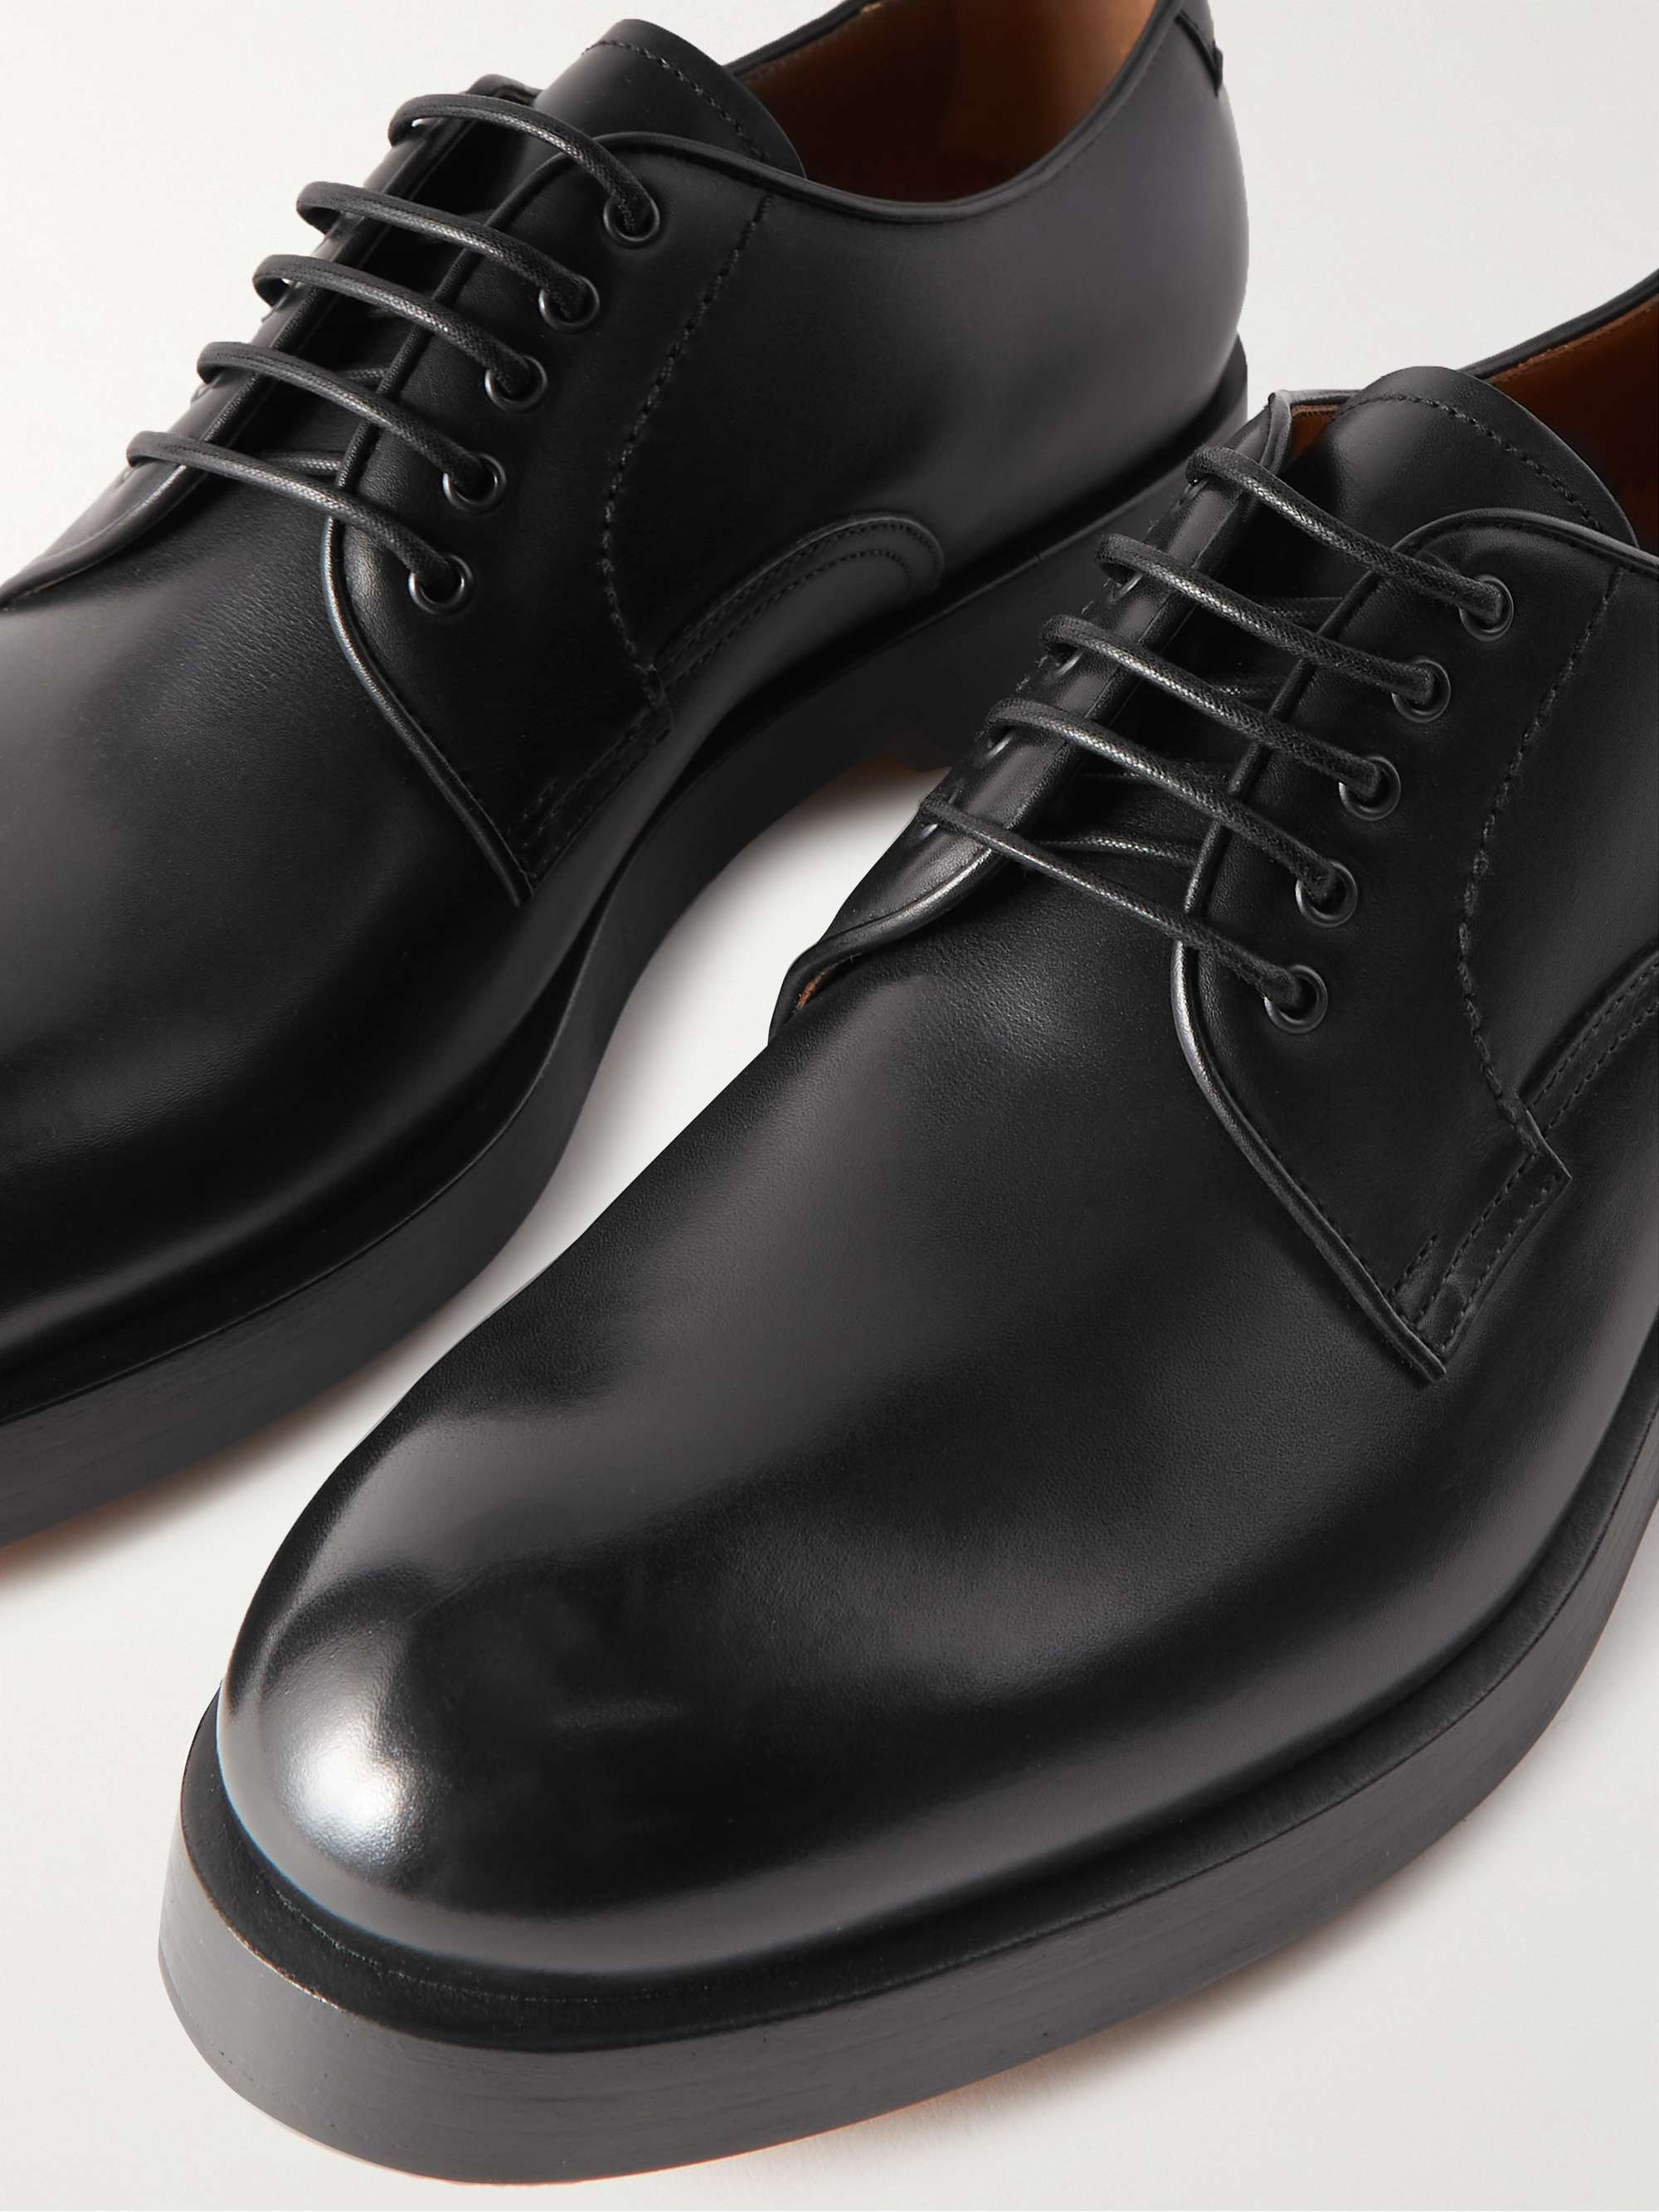 ZEGNA Udine Leather Derby Shoes